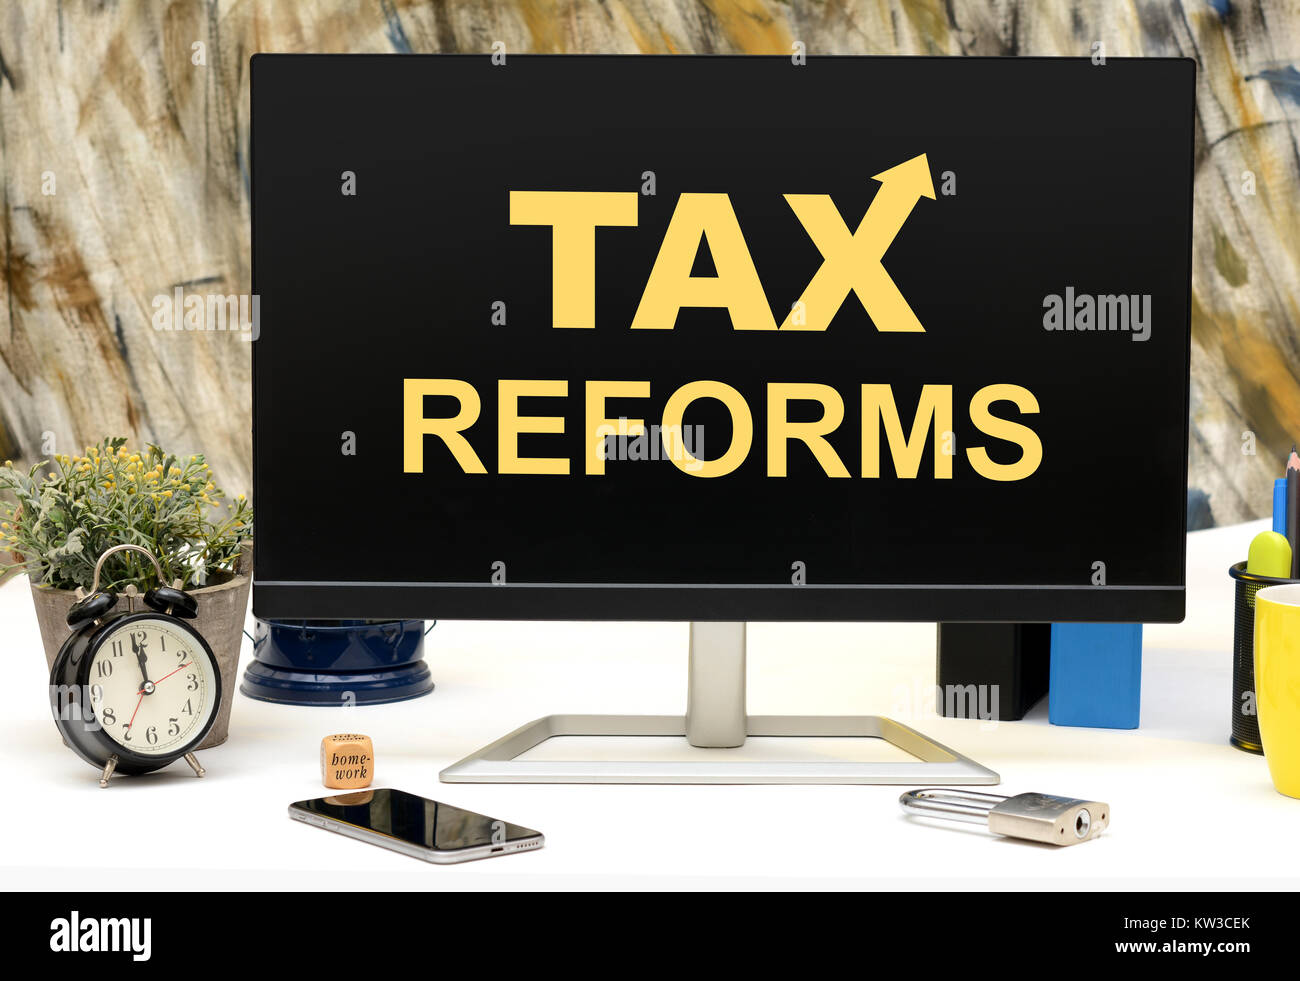 Tax Reforms with arrow going up office monitor. Stock Photo